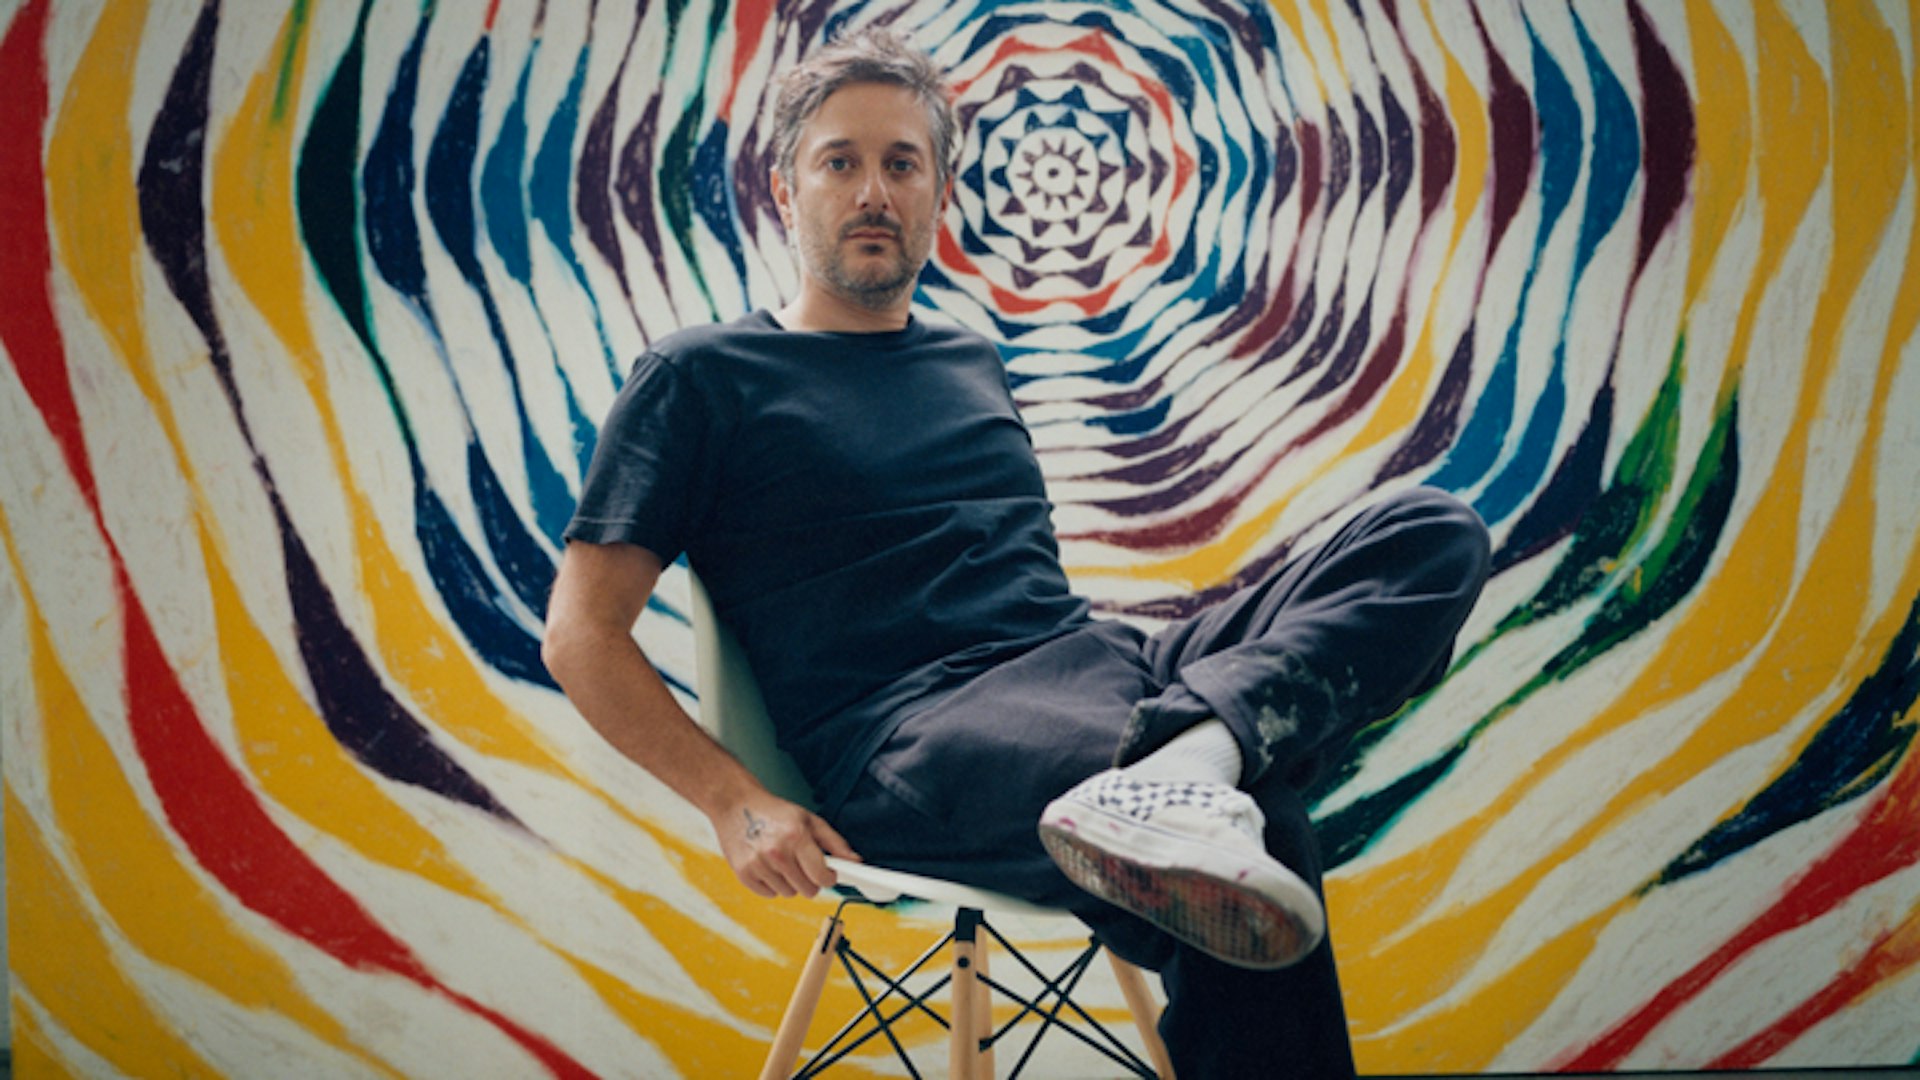 Five things we learned from Harmony Korine in London